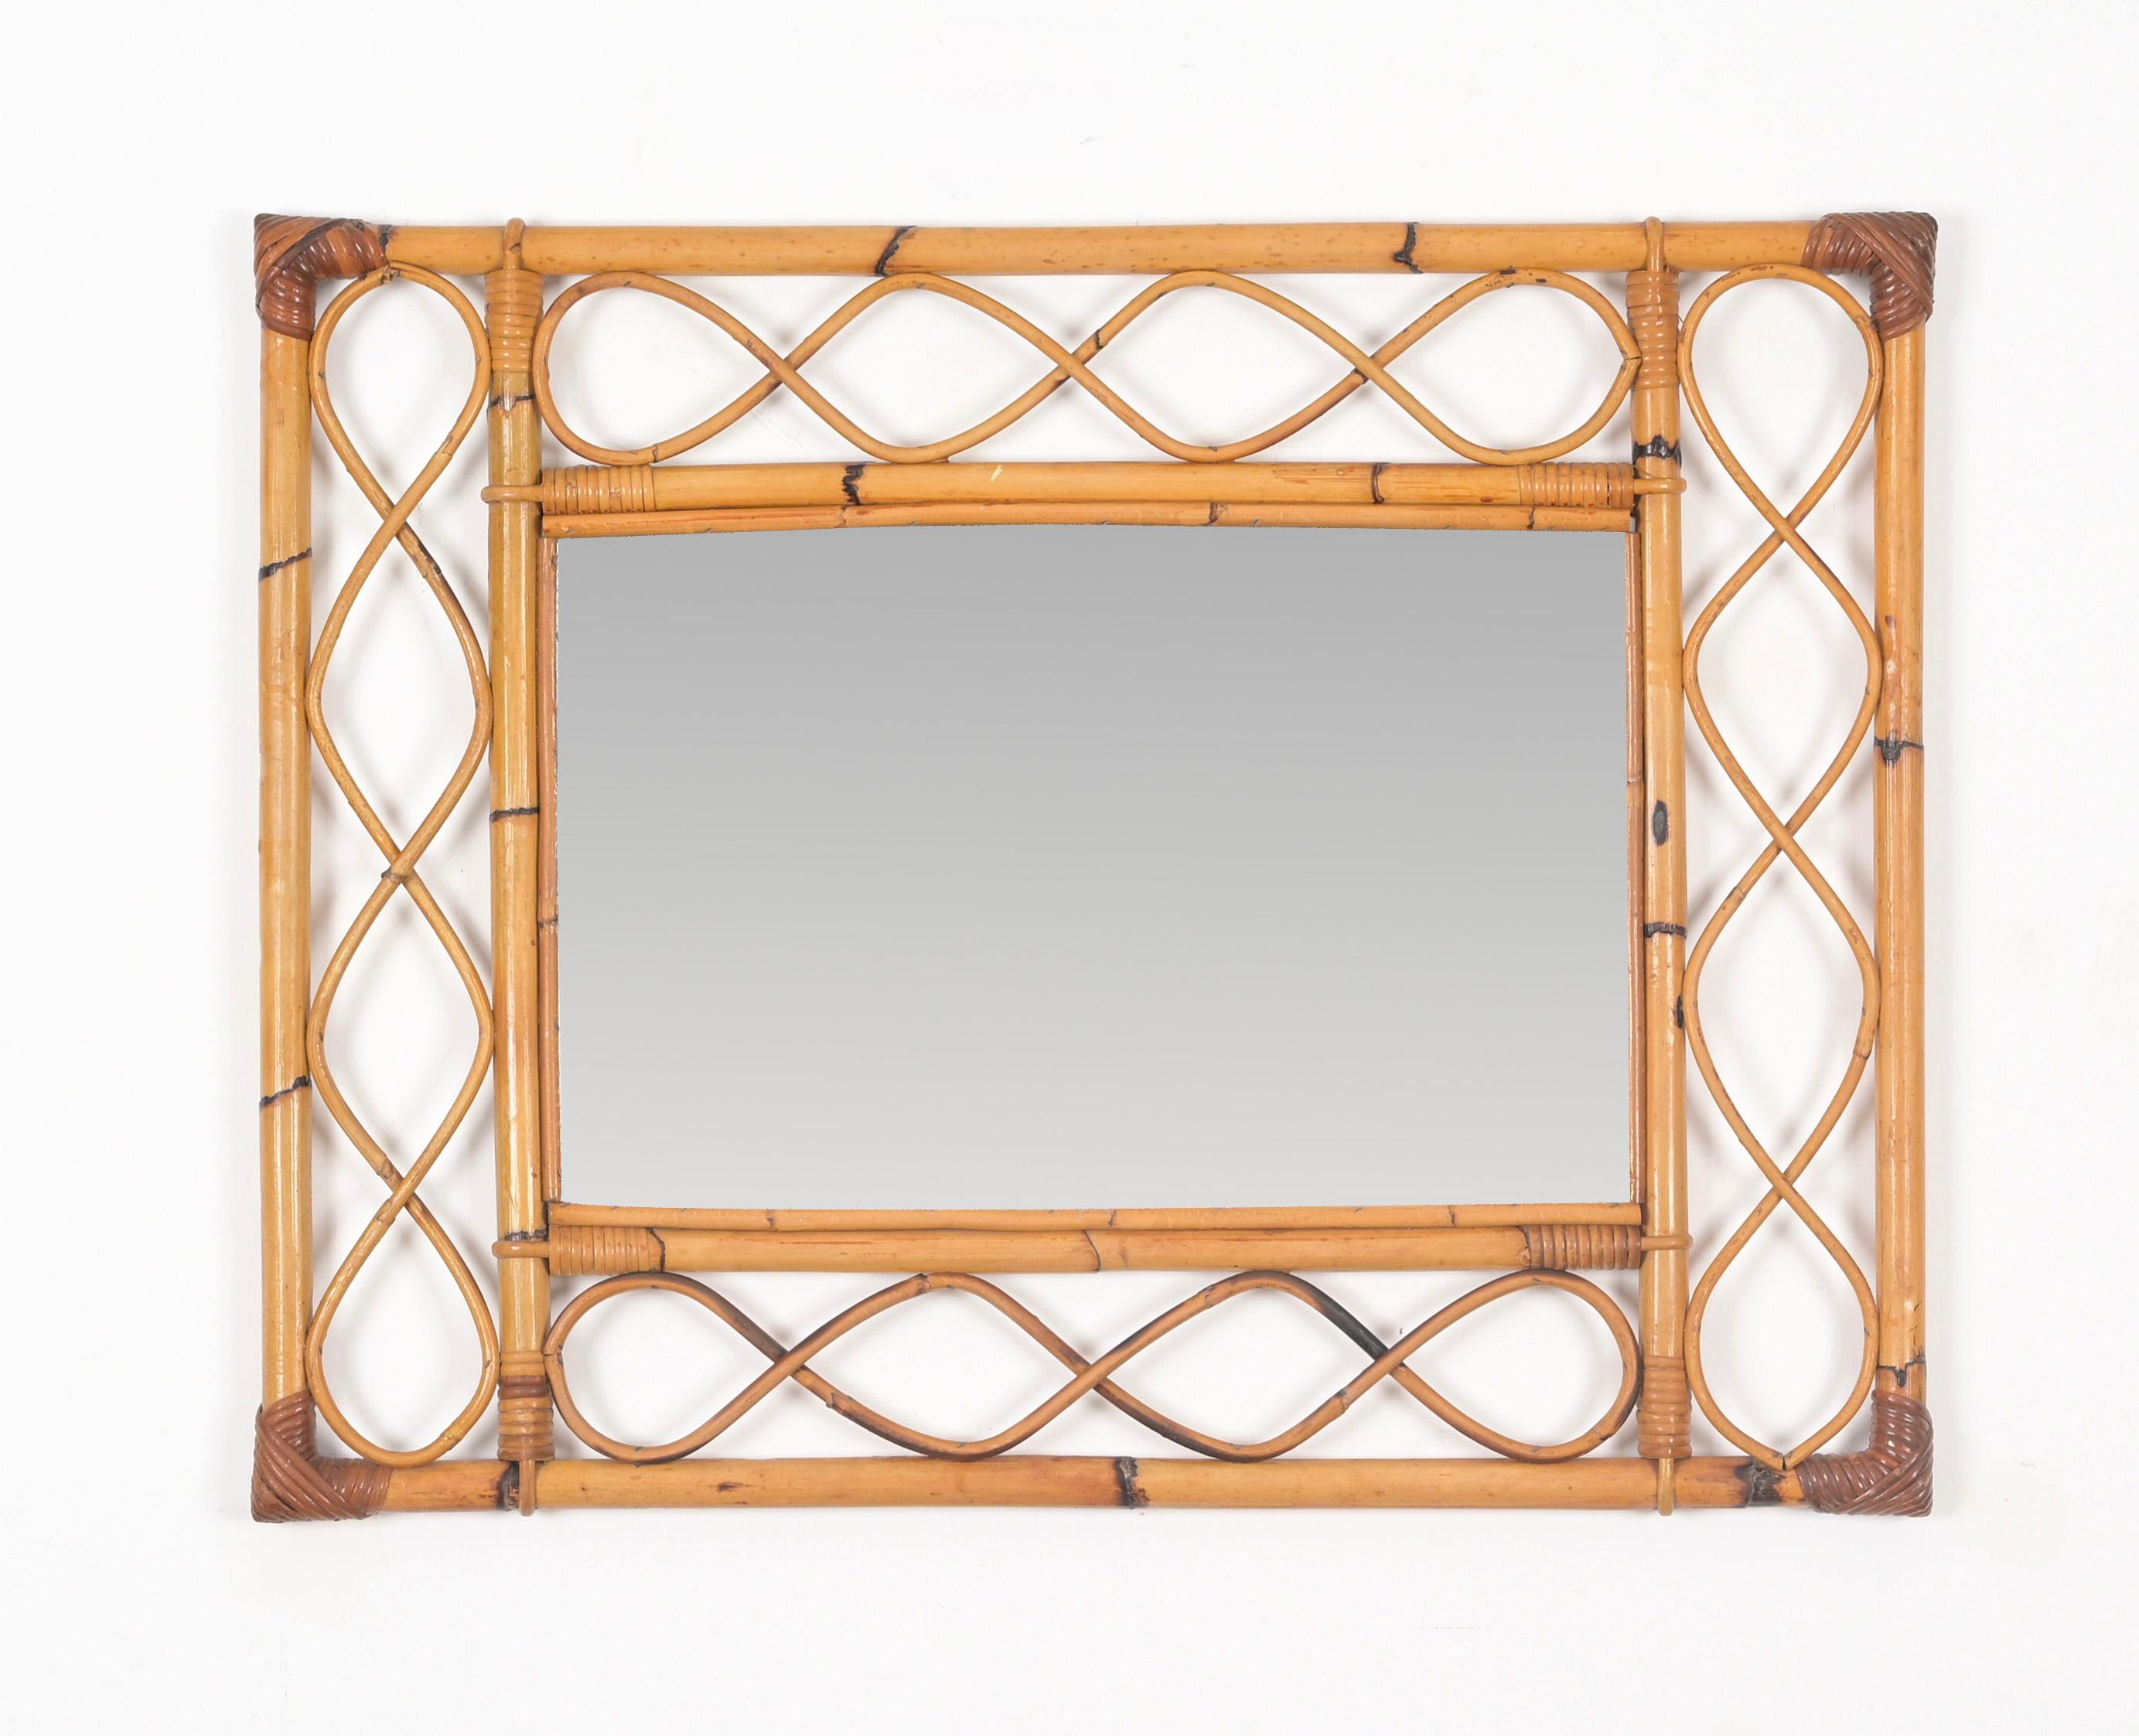 Mid-20th Century Midcentury French Riviera Bamboo, Rattan, Wicker Rectangular Mirror, Italy 1960s For Sale